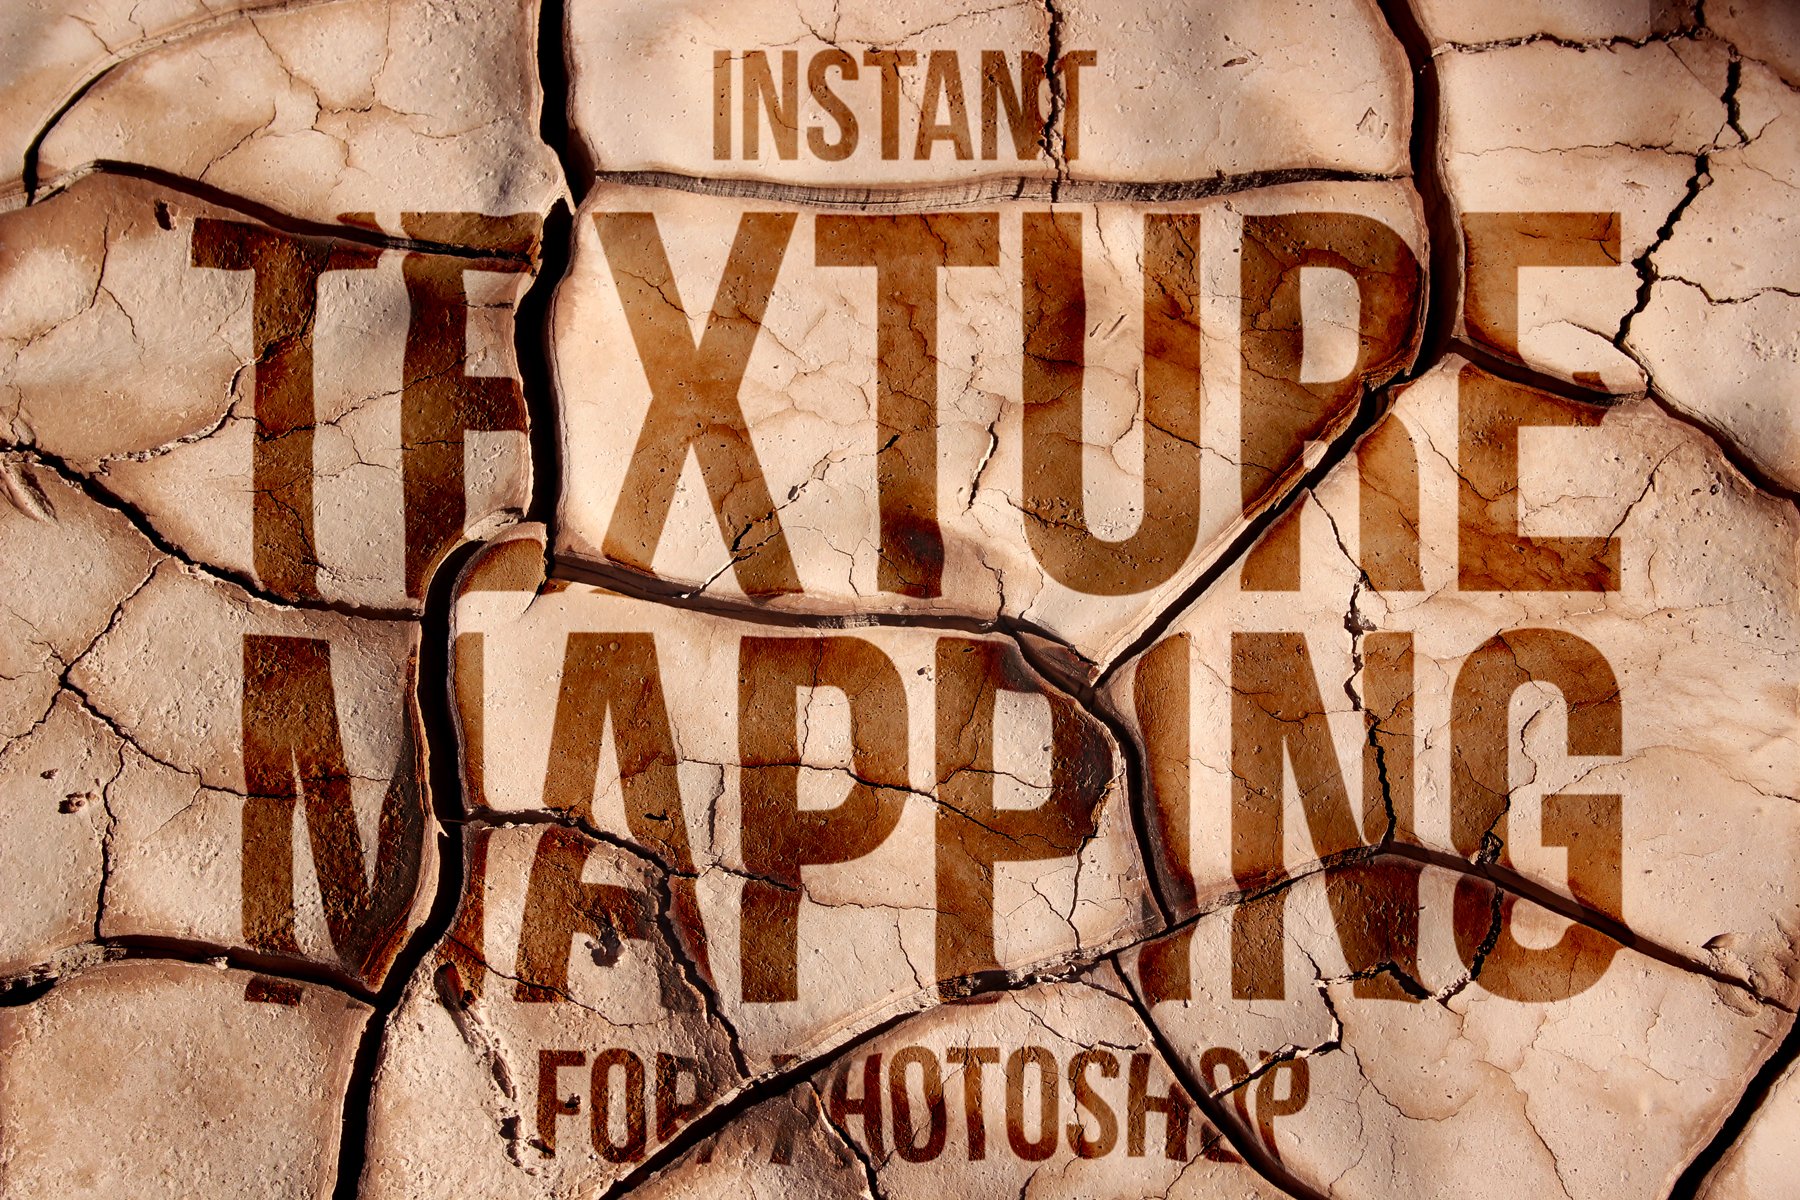 Instant Photoshop Texture Mappingcover image.